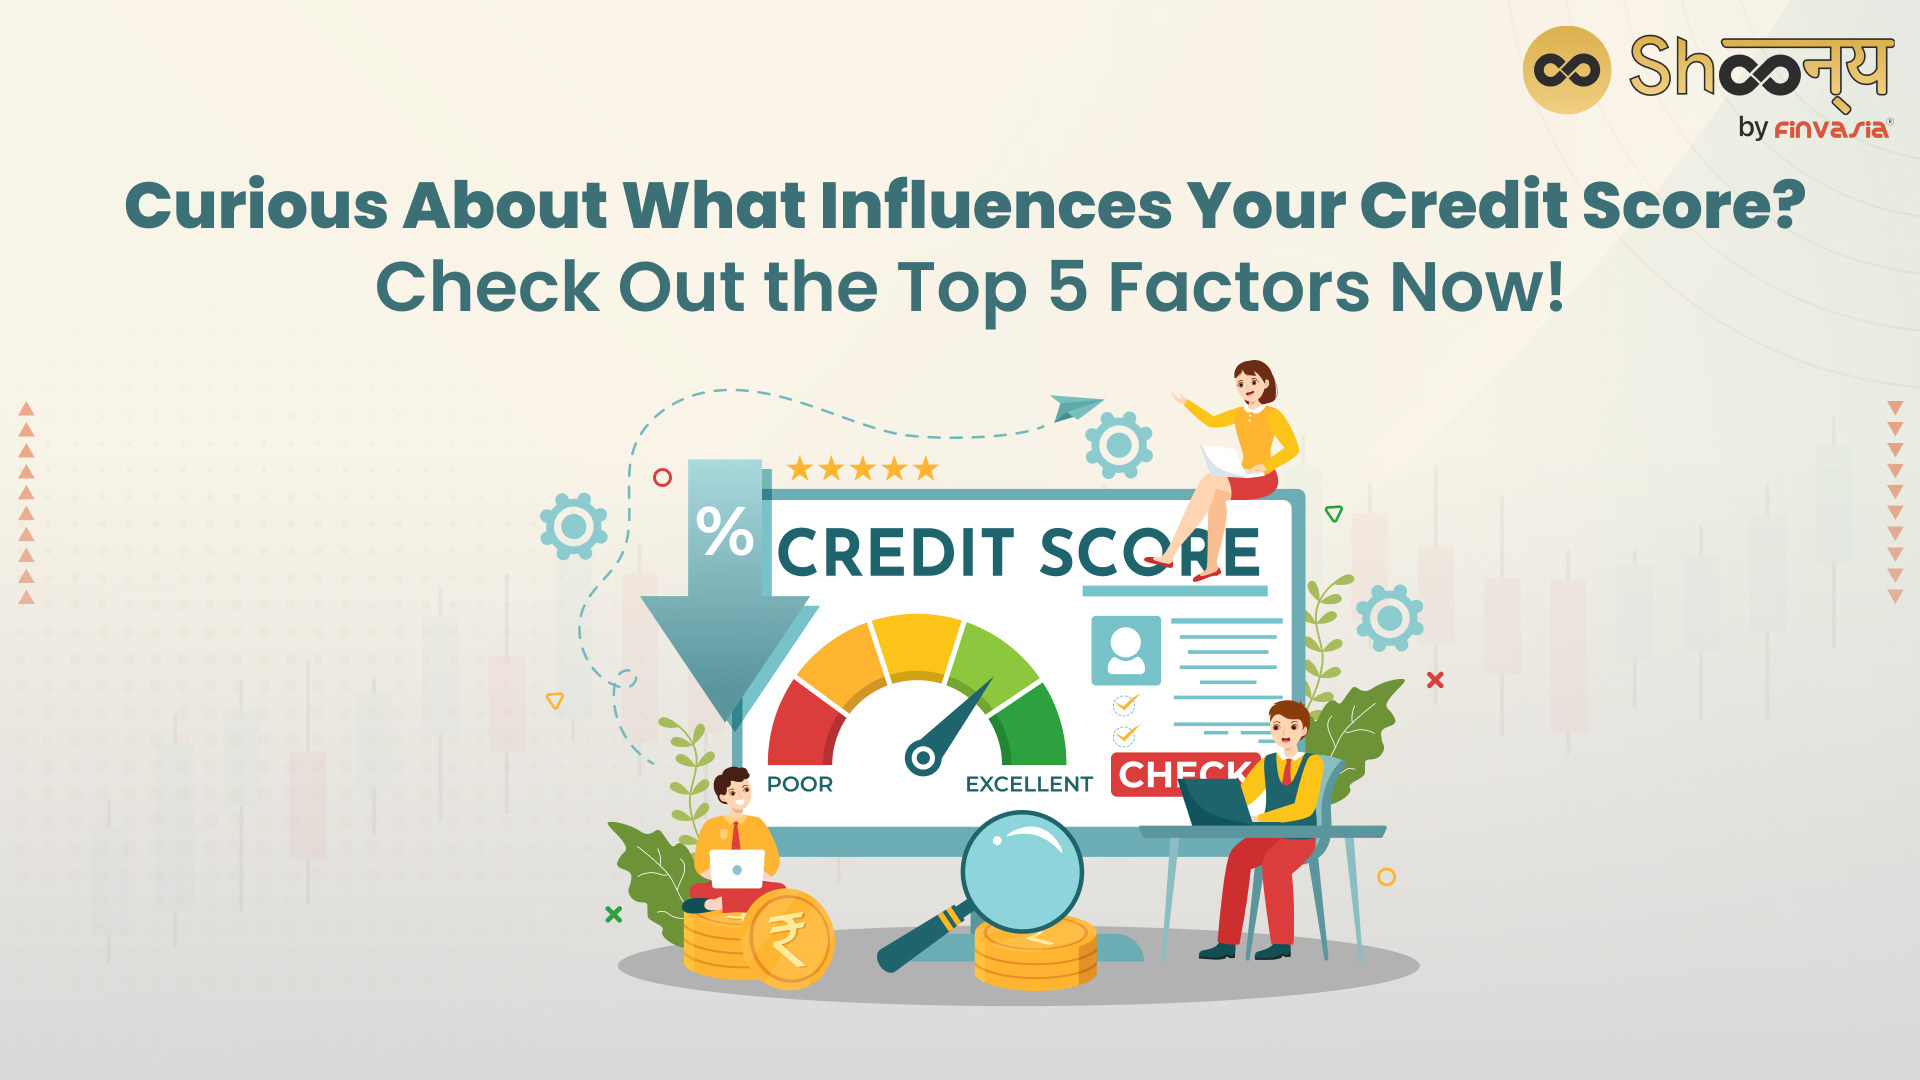 What are the 5 Key Factors Affecting Credit Score?